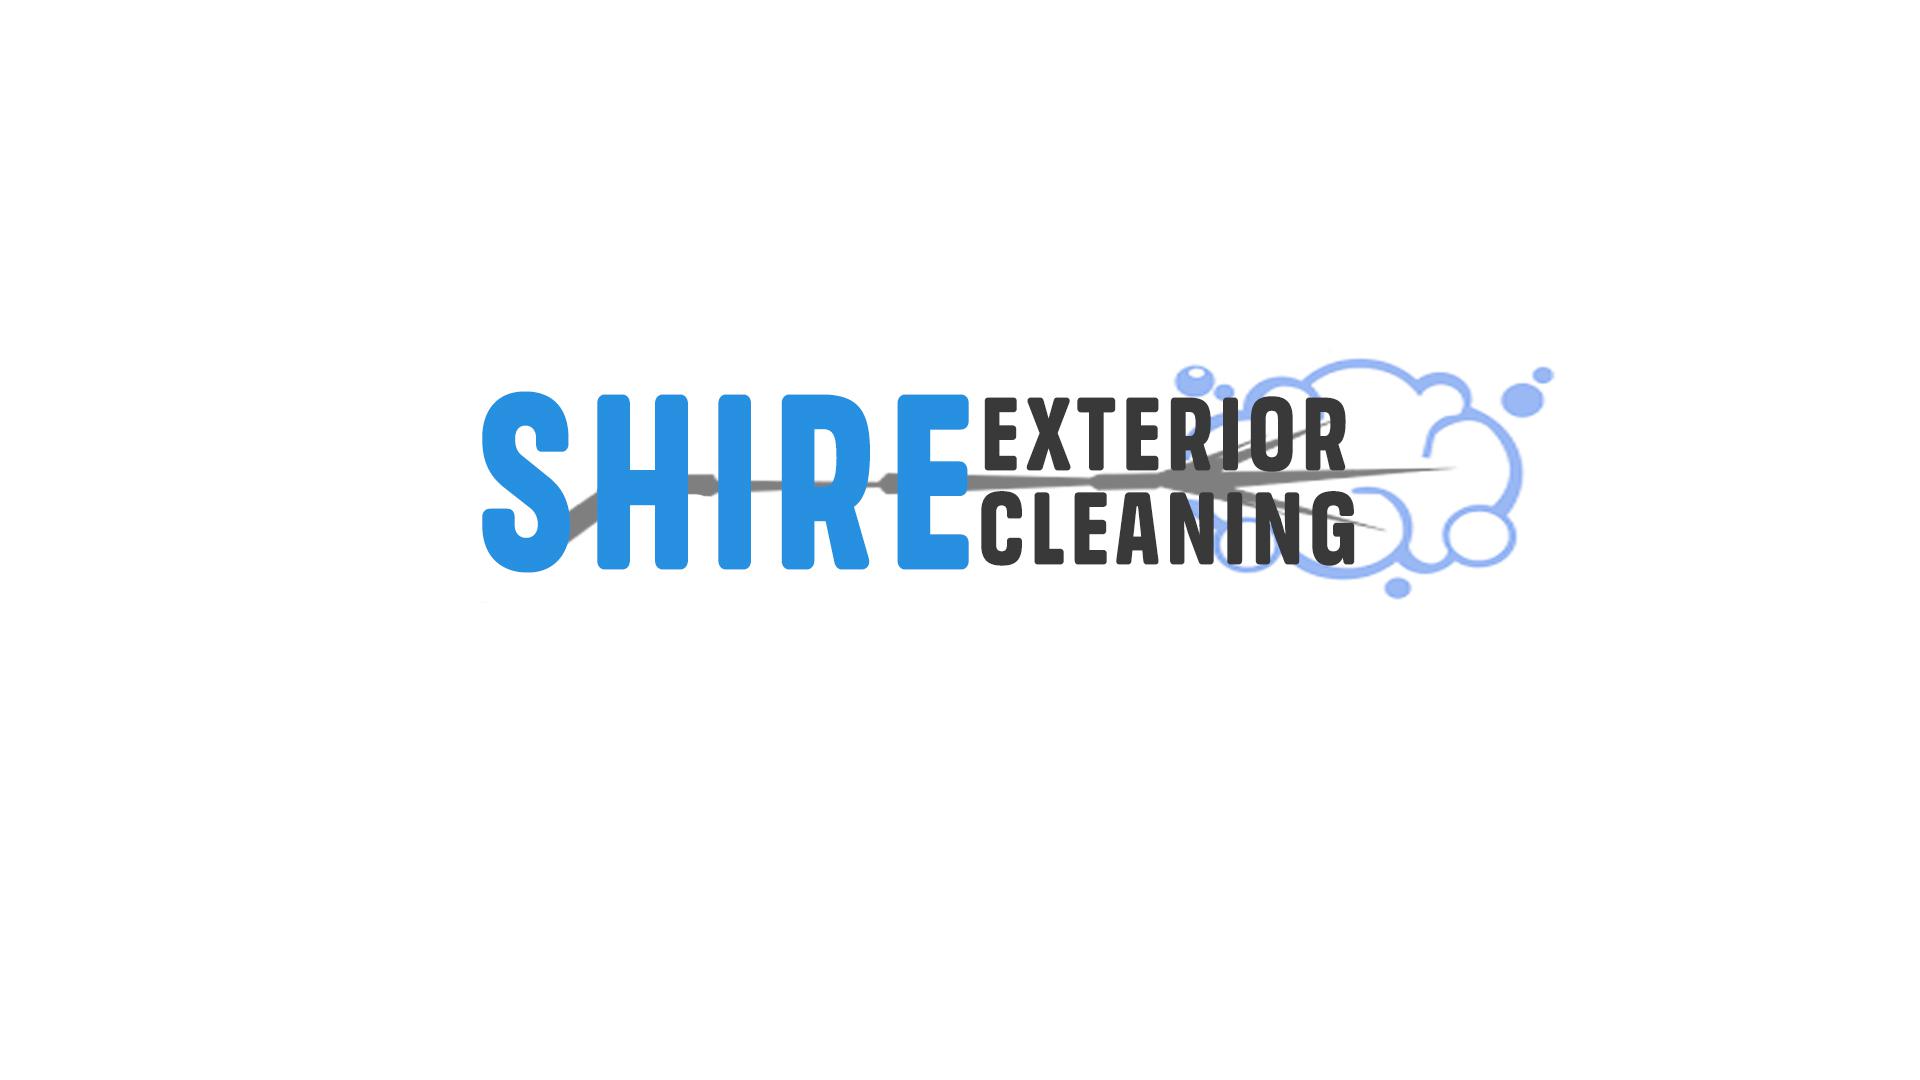 Shire Exterior Cleaning Logo